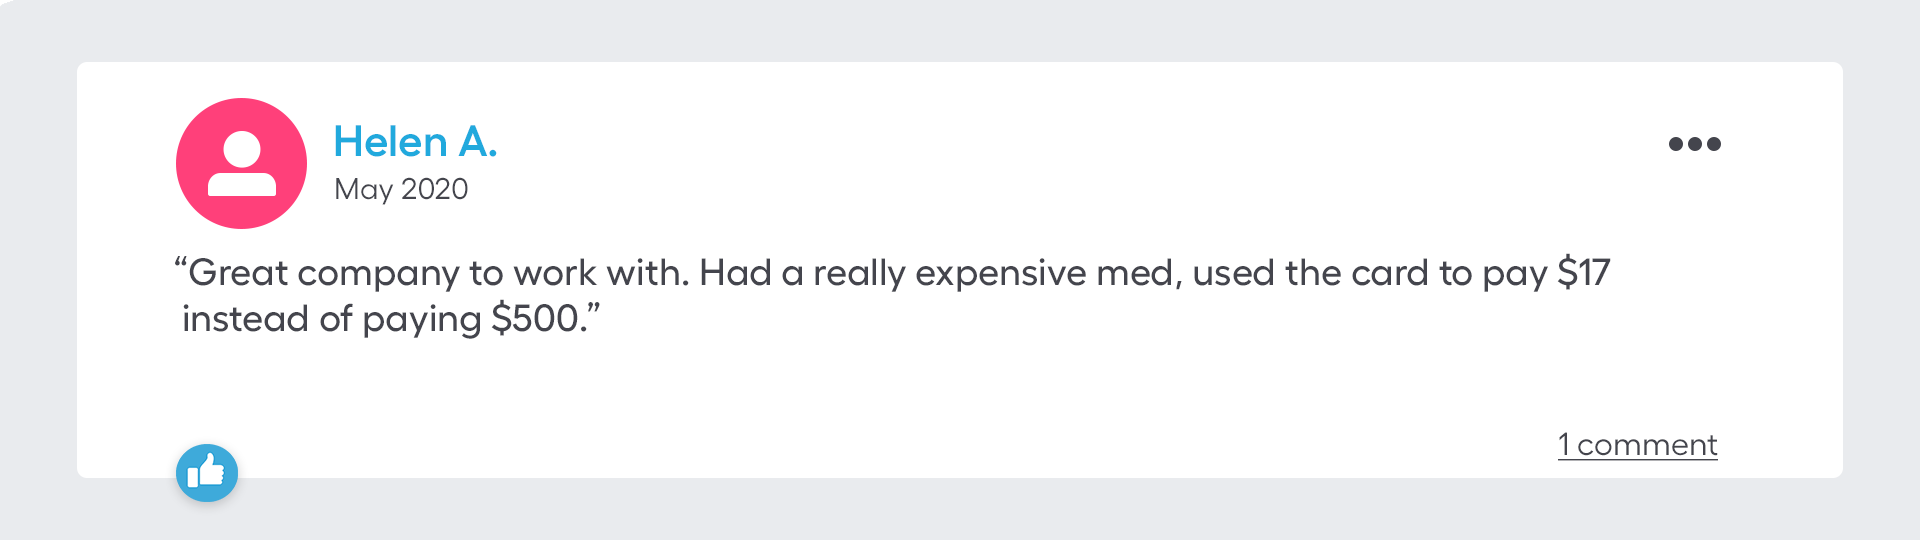 Great company to work with. Had a really expensive med, used the card to pay $17 instead of paying $500.